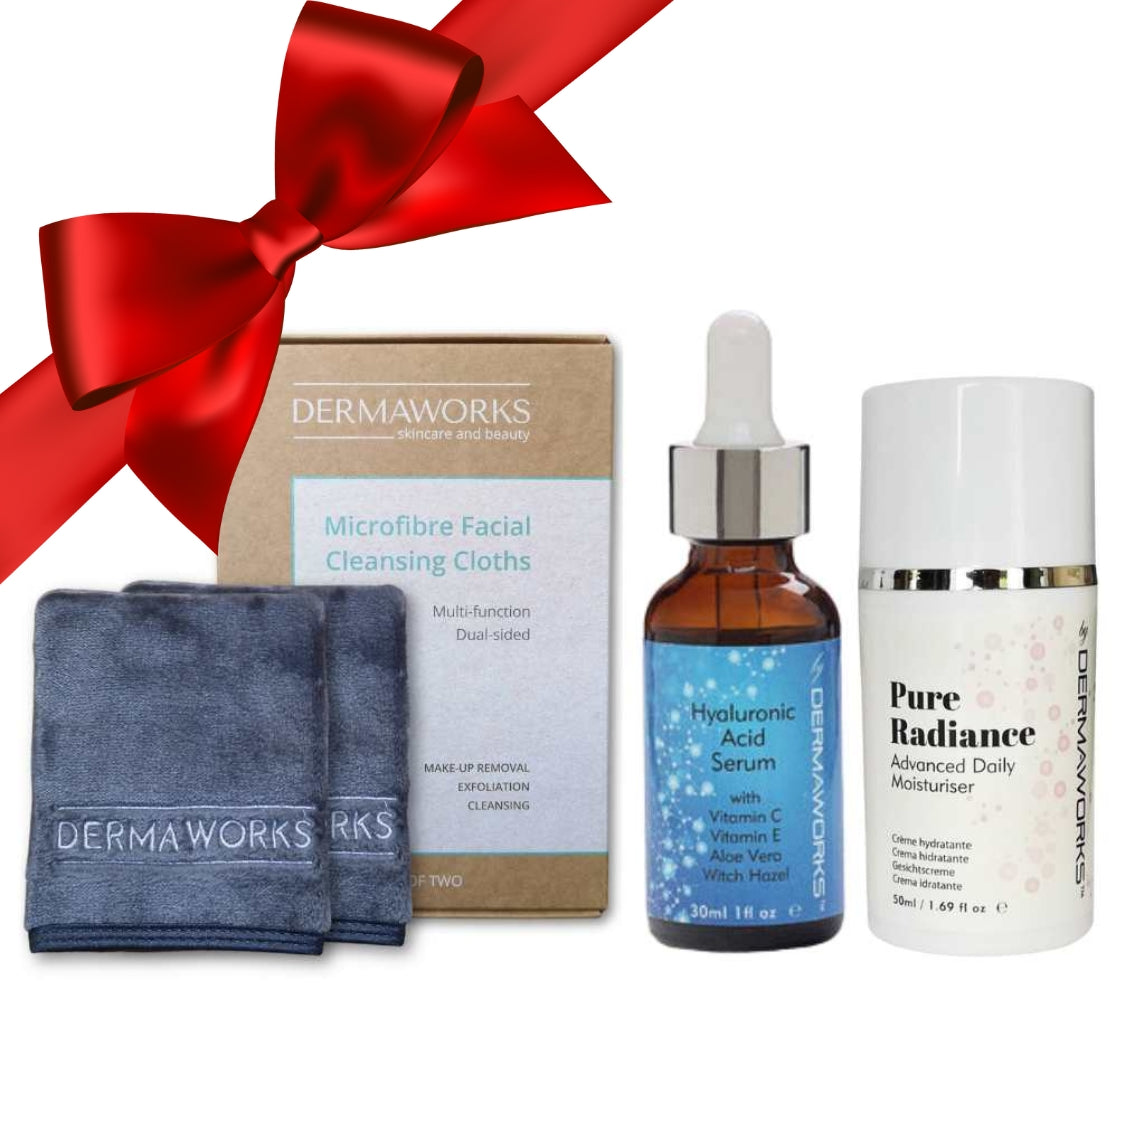 Dermaworks skincare and Beauty woman's gift set with flannel wash cloths, hydrating hyaluronic acid serum and face cream moisturiser.